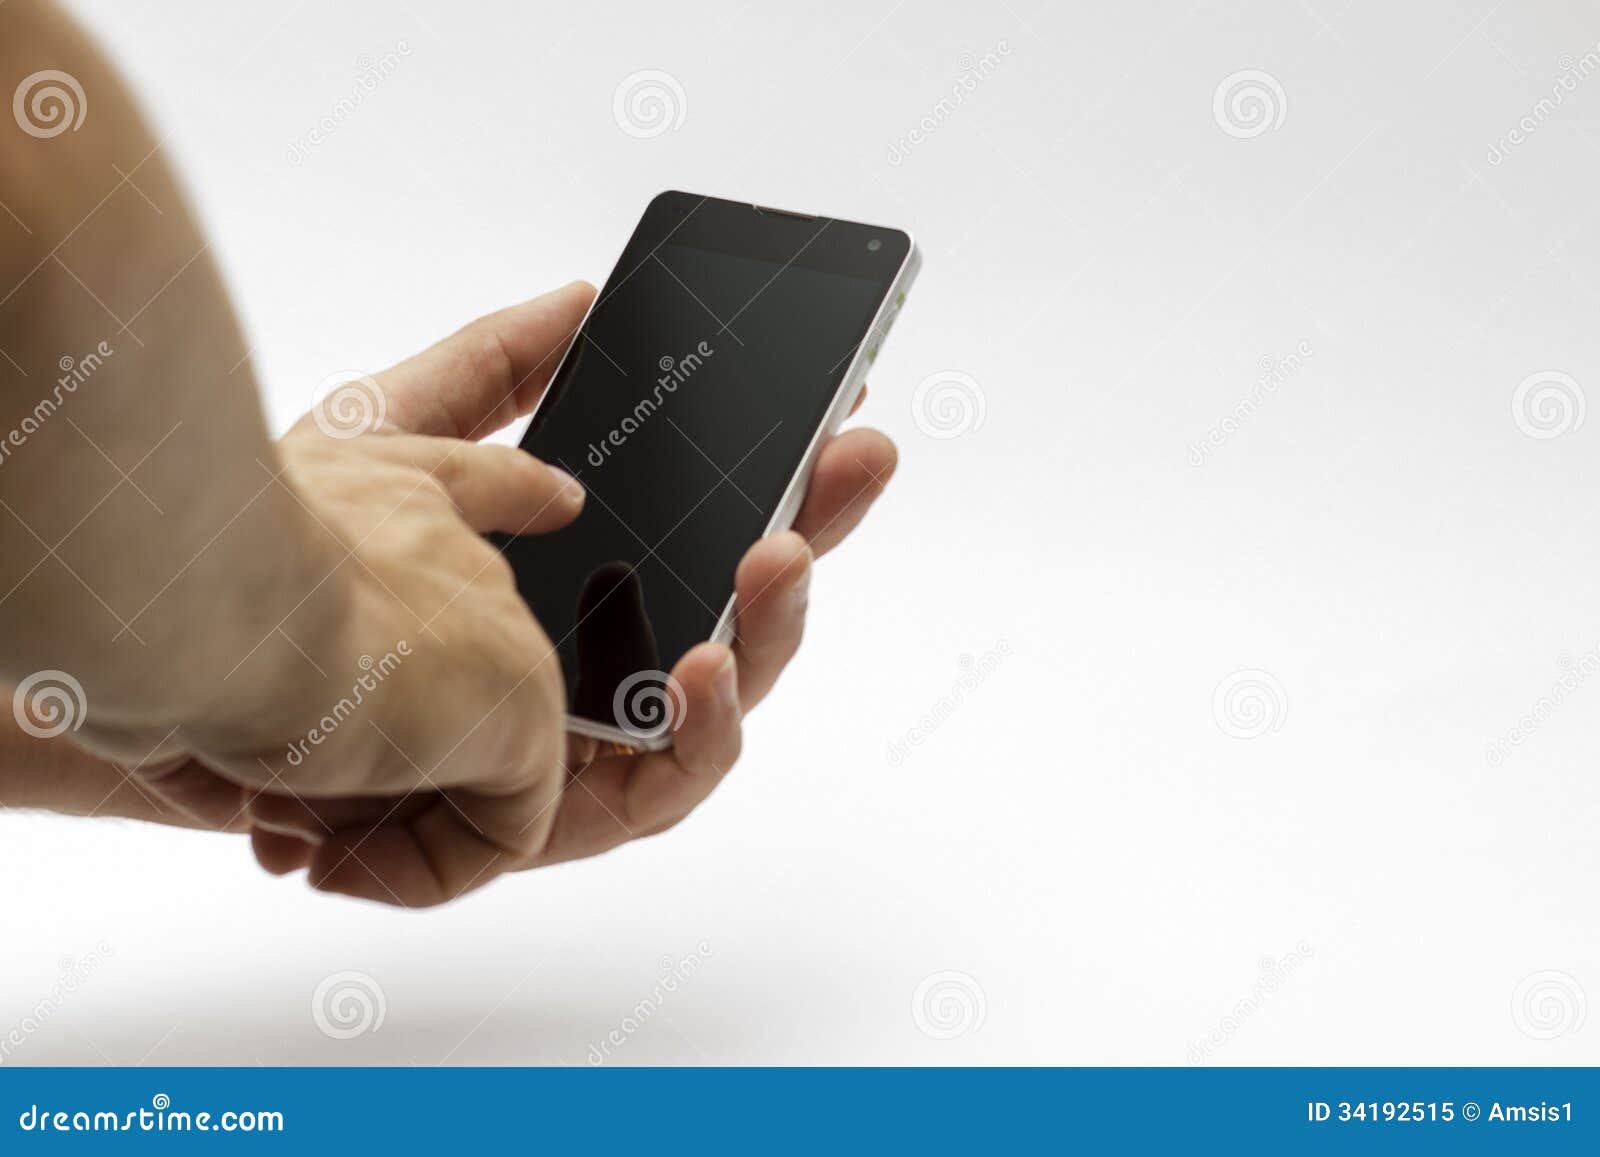 Hand Holding and Using a Smartphone / Phone (isolated) Stock Image ...